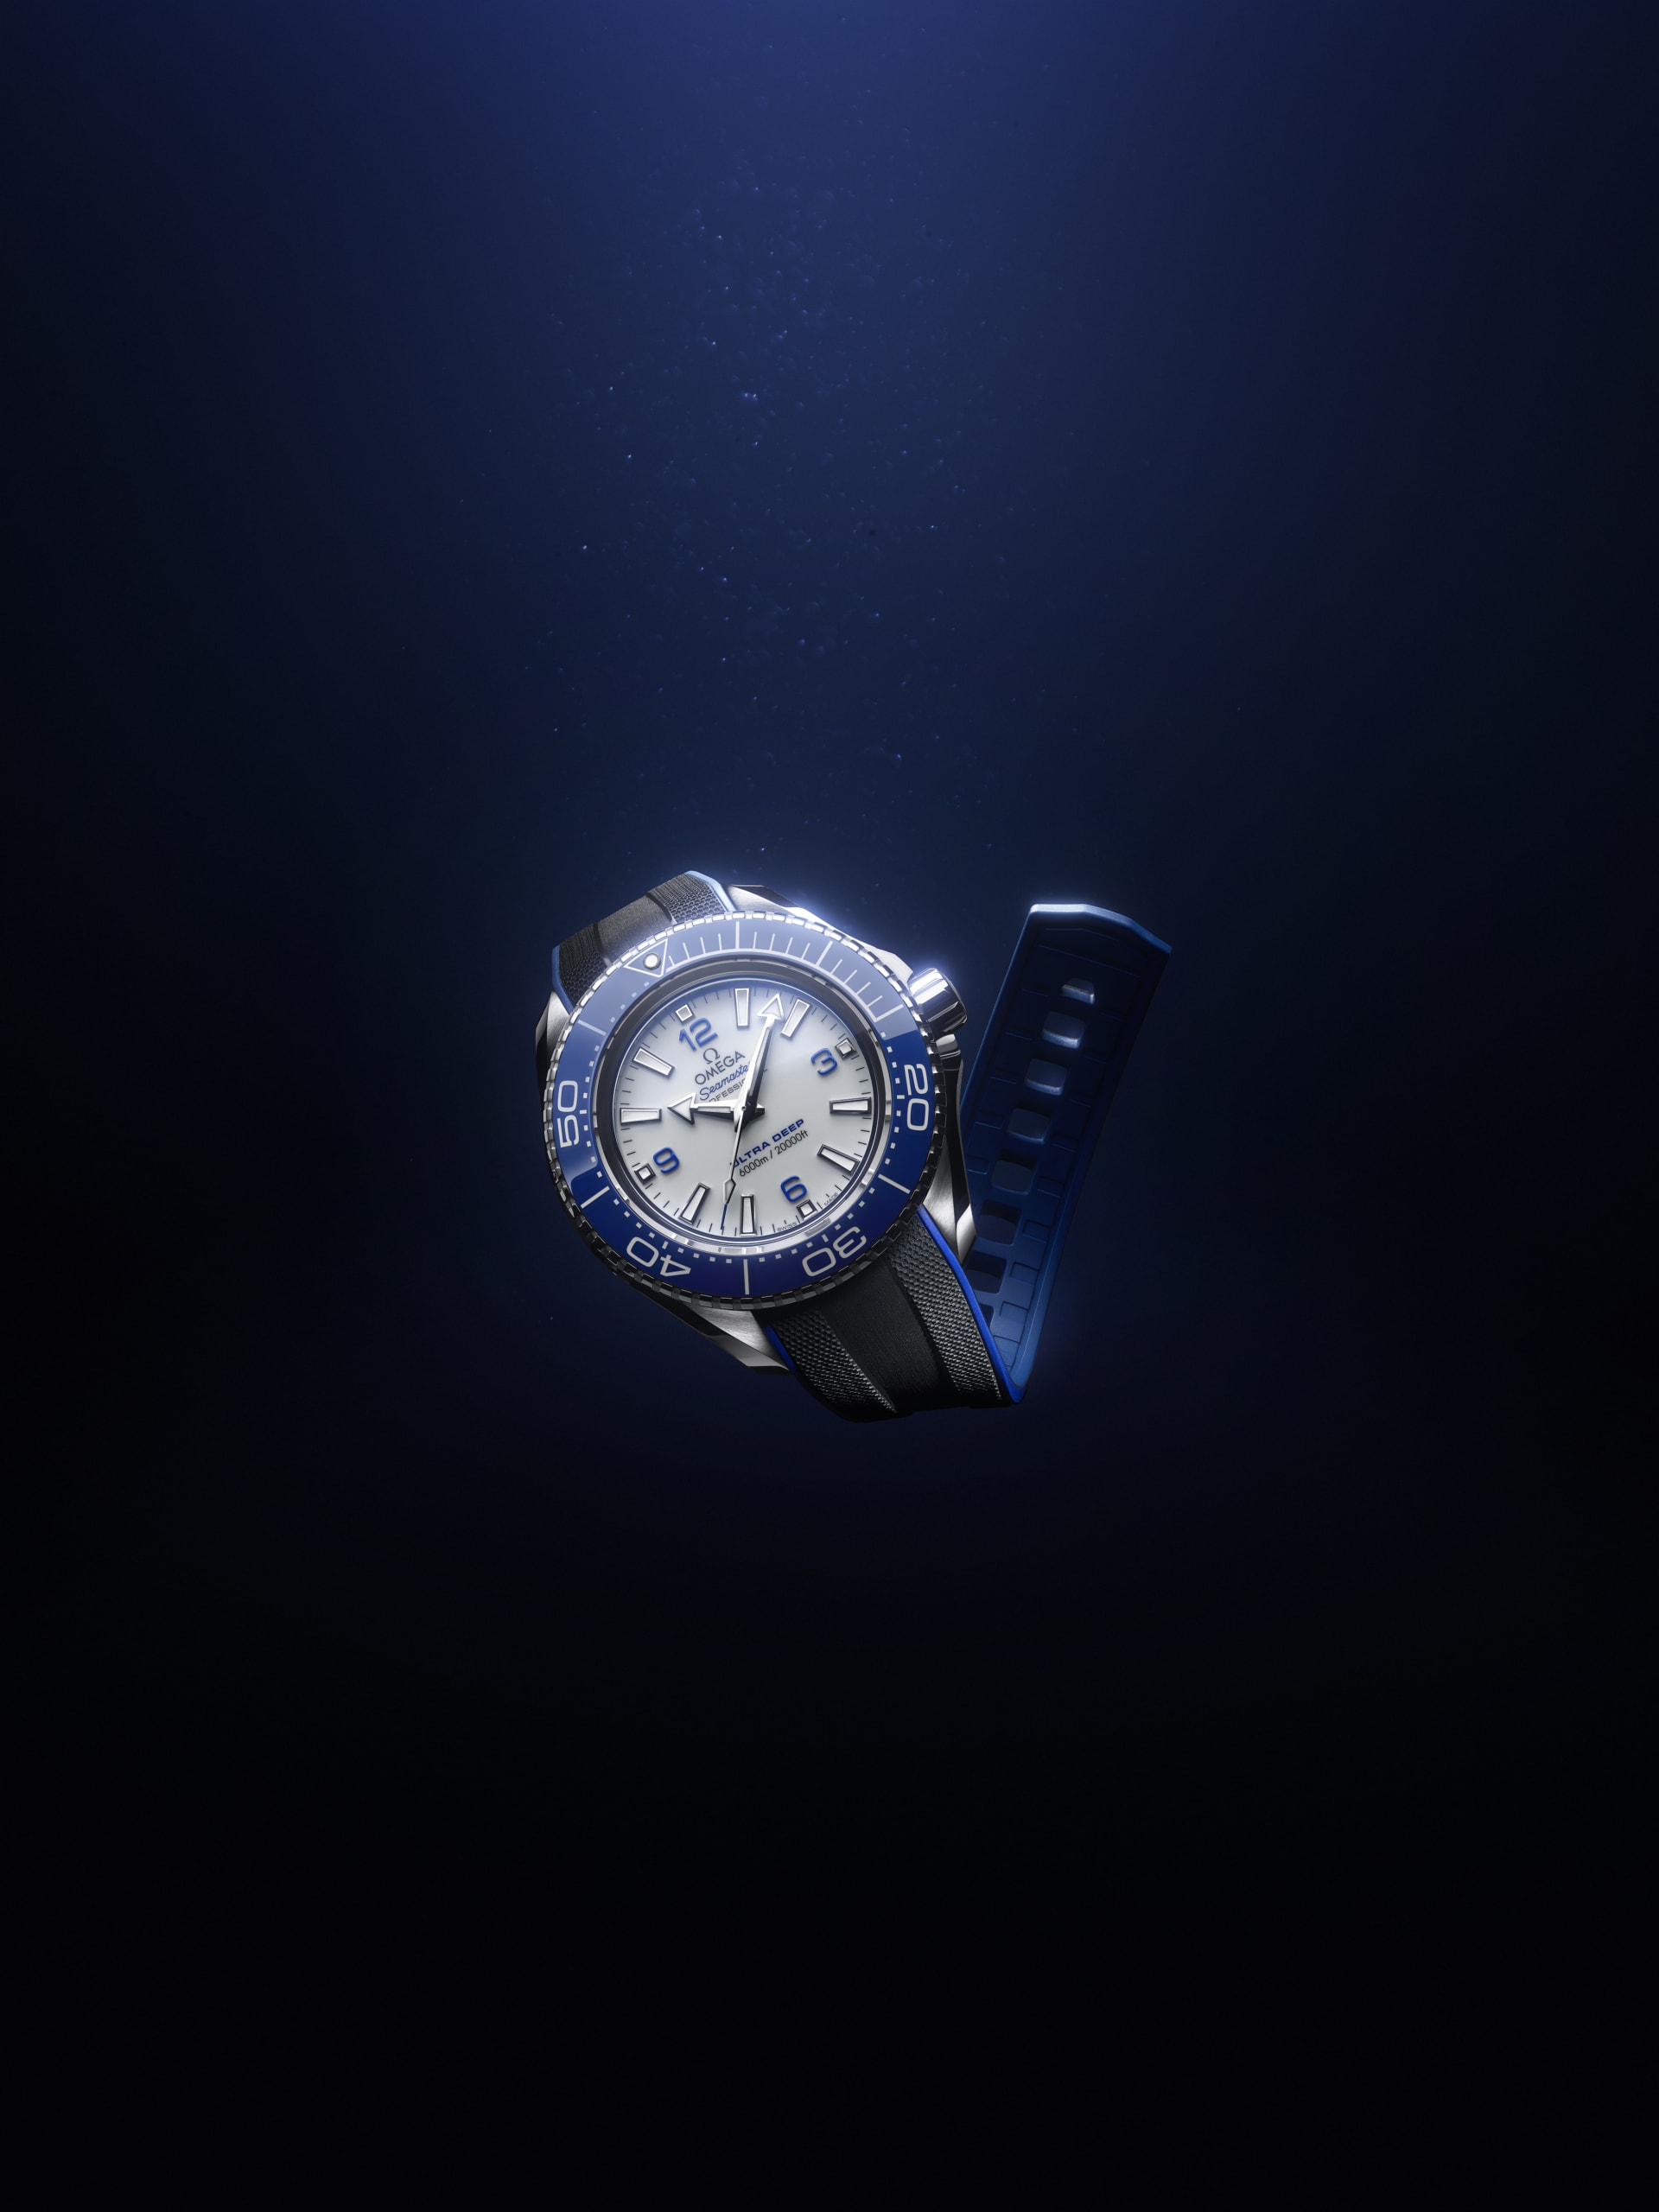 Omega's new Seamaster Planet Ocean Ultra Deep OMEGA_215.32.46.21.04.001-scaled